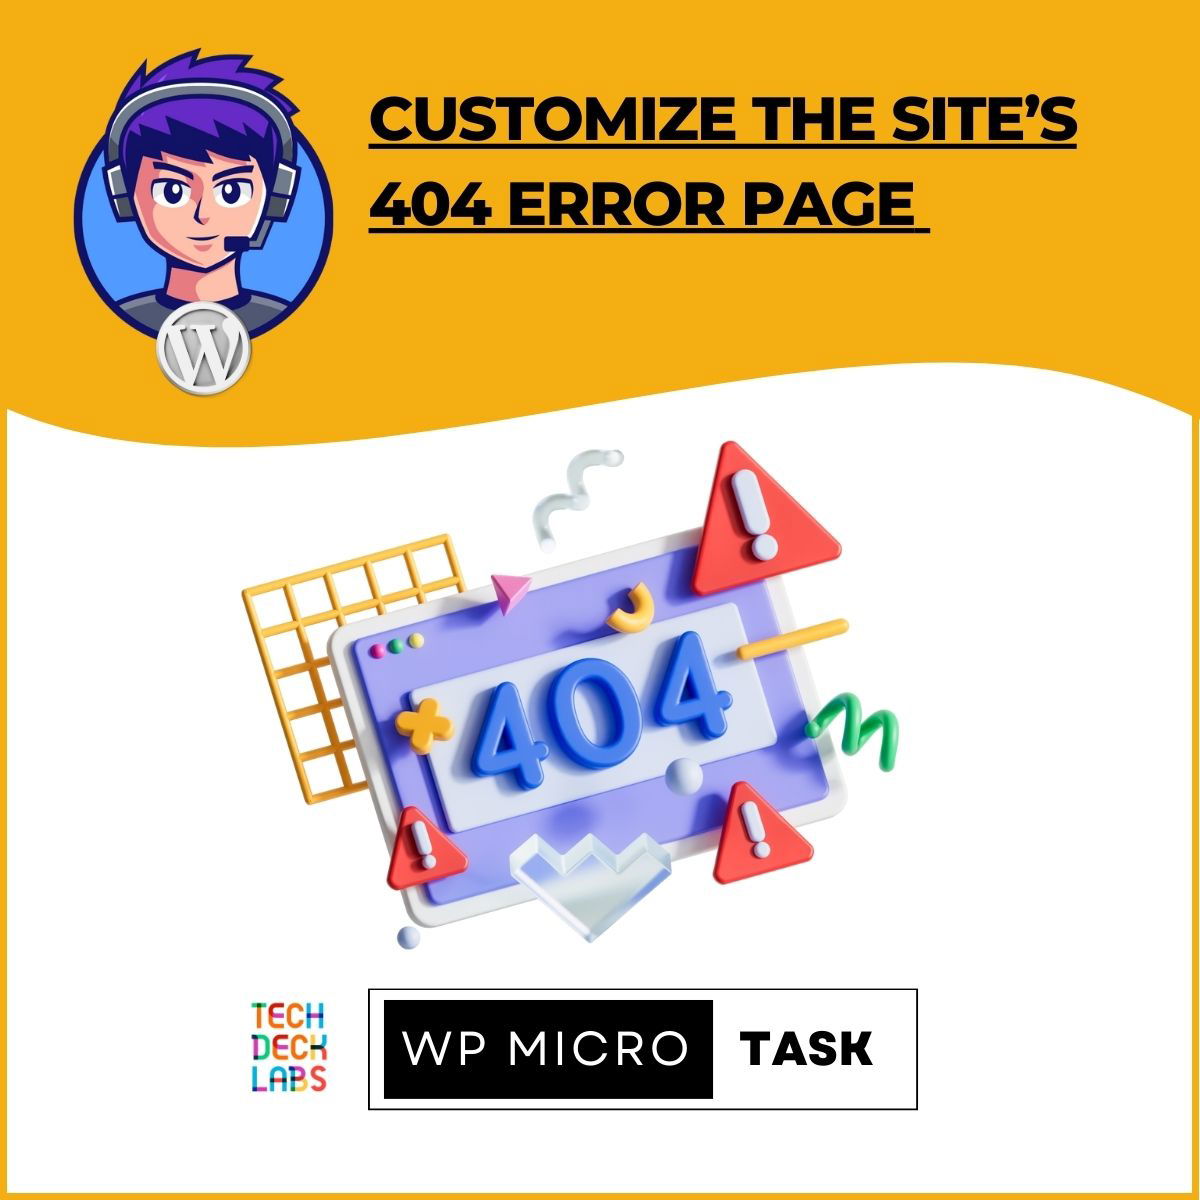 Customize the site's 404 error page - WordPress MicroTask